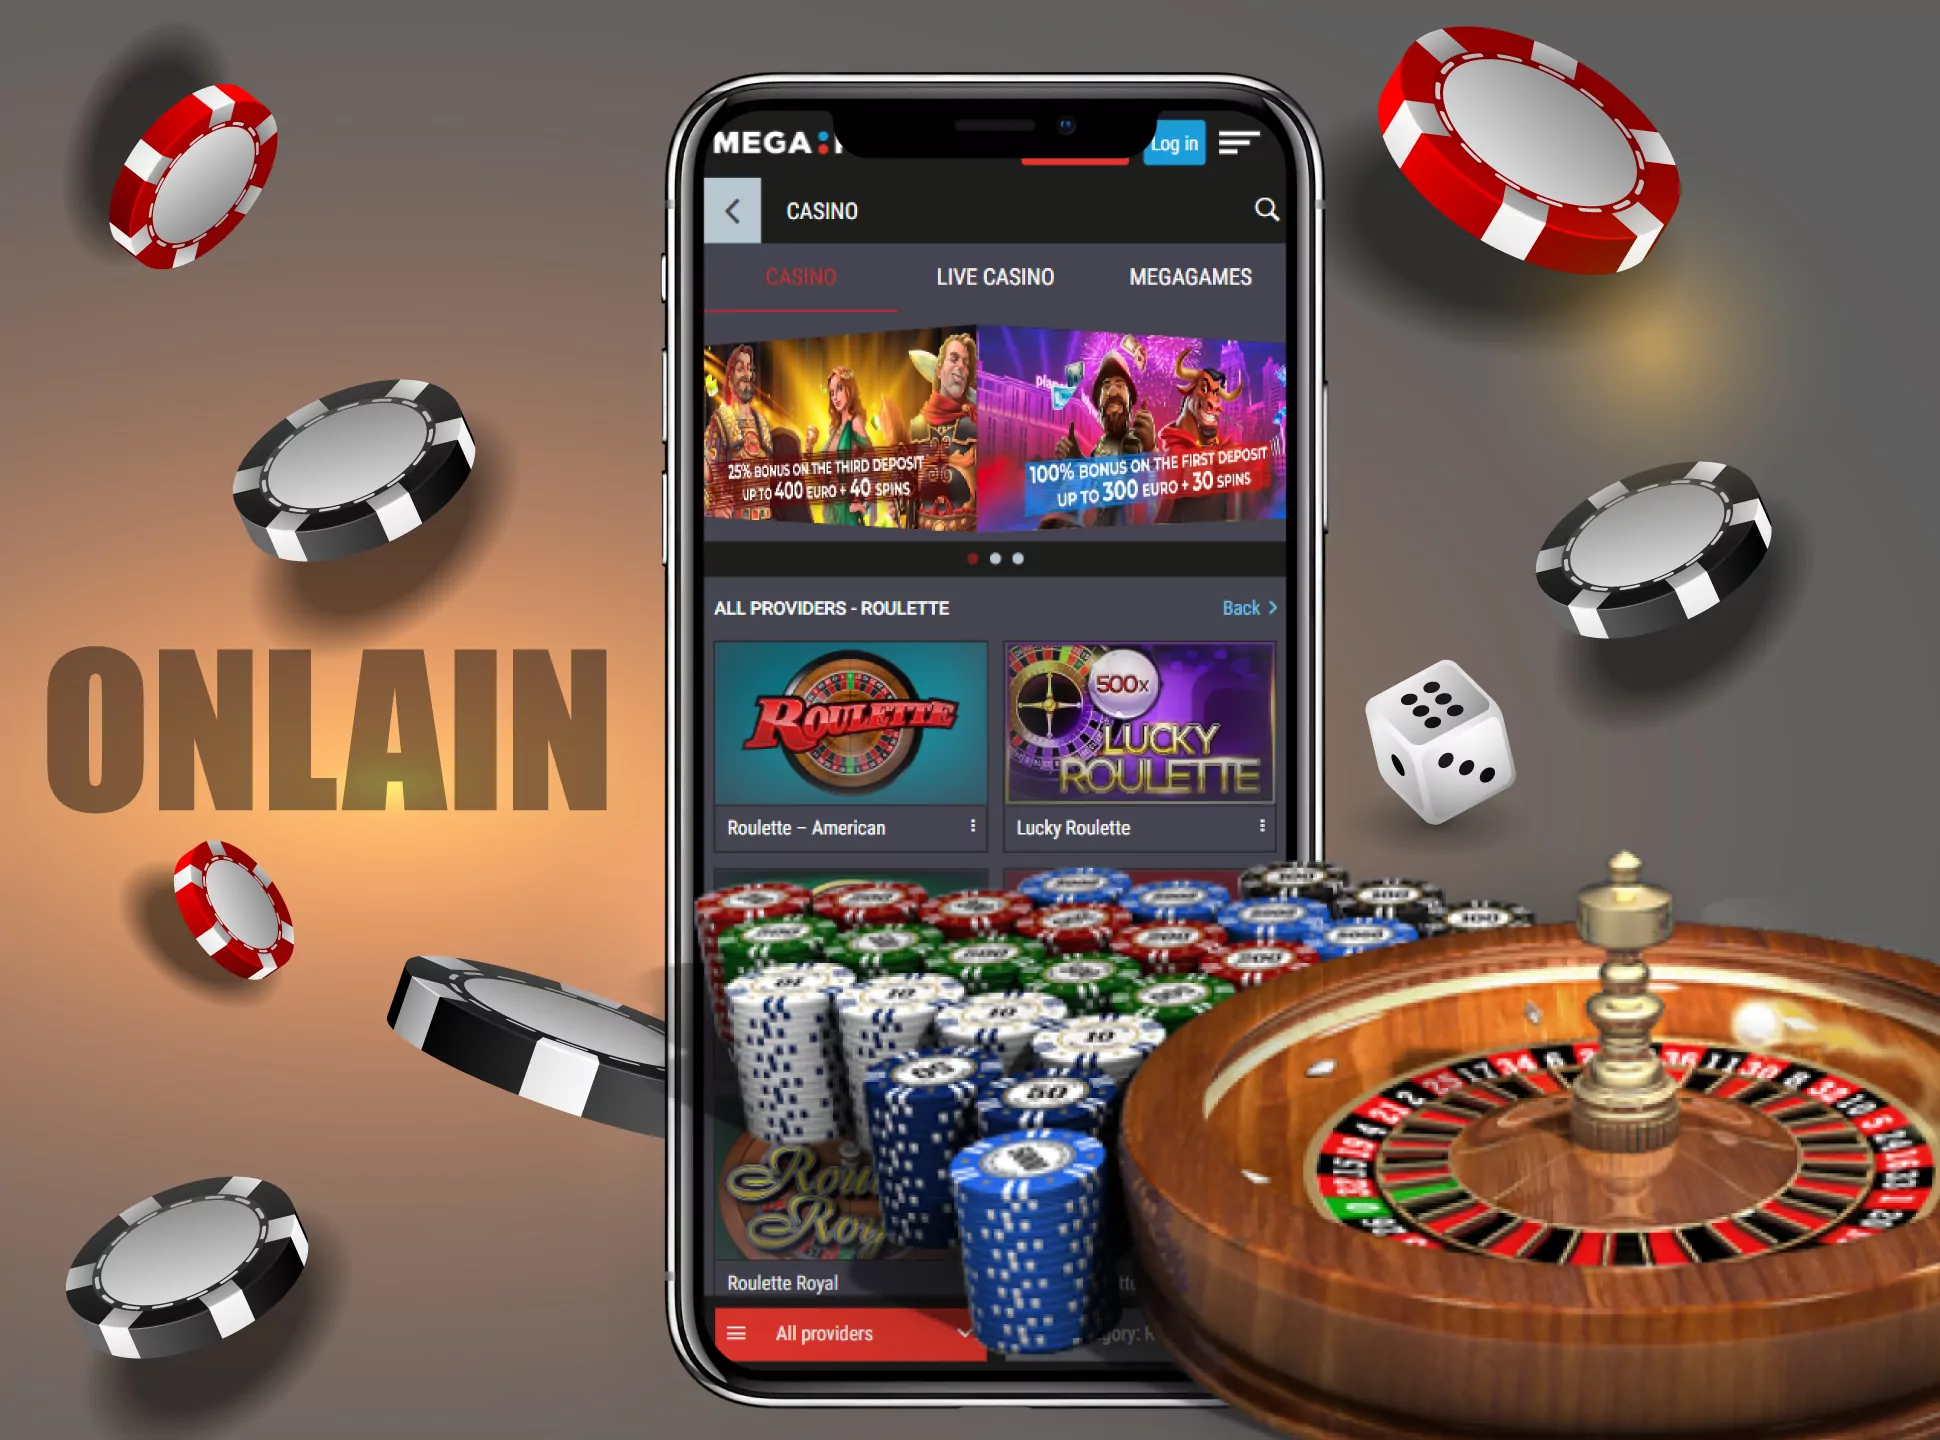 Casino apps always have online roulette.